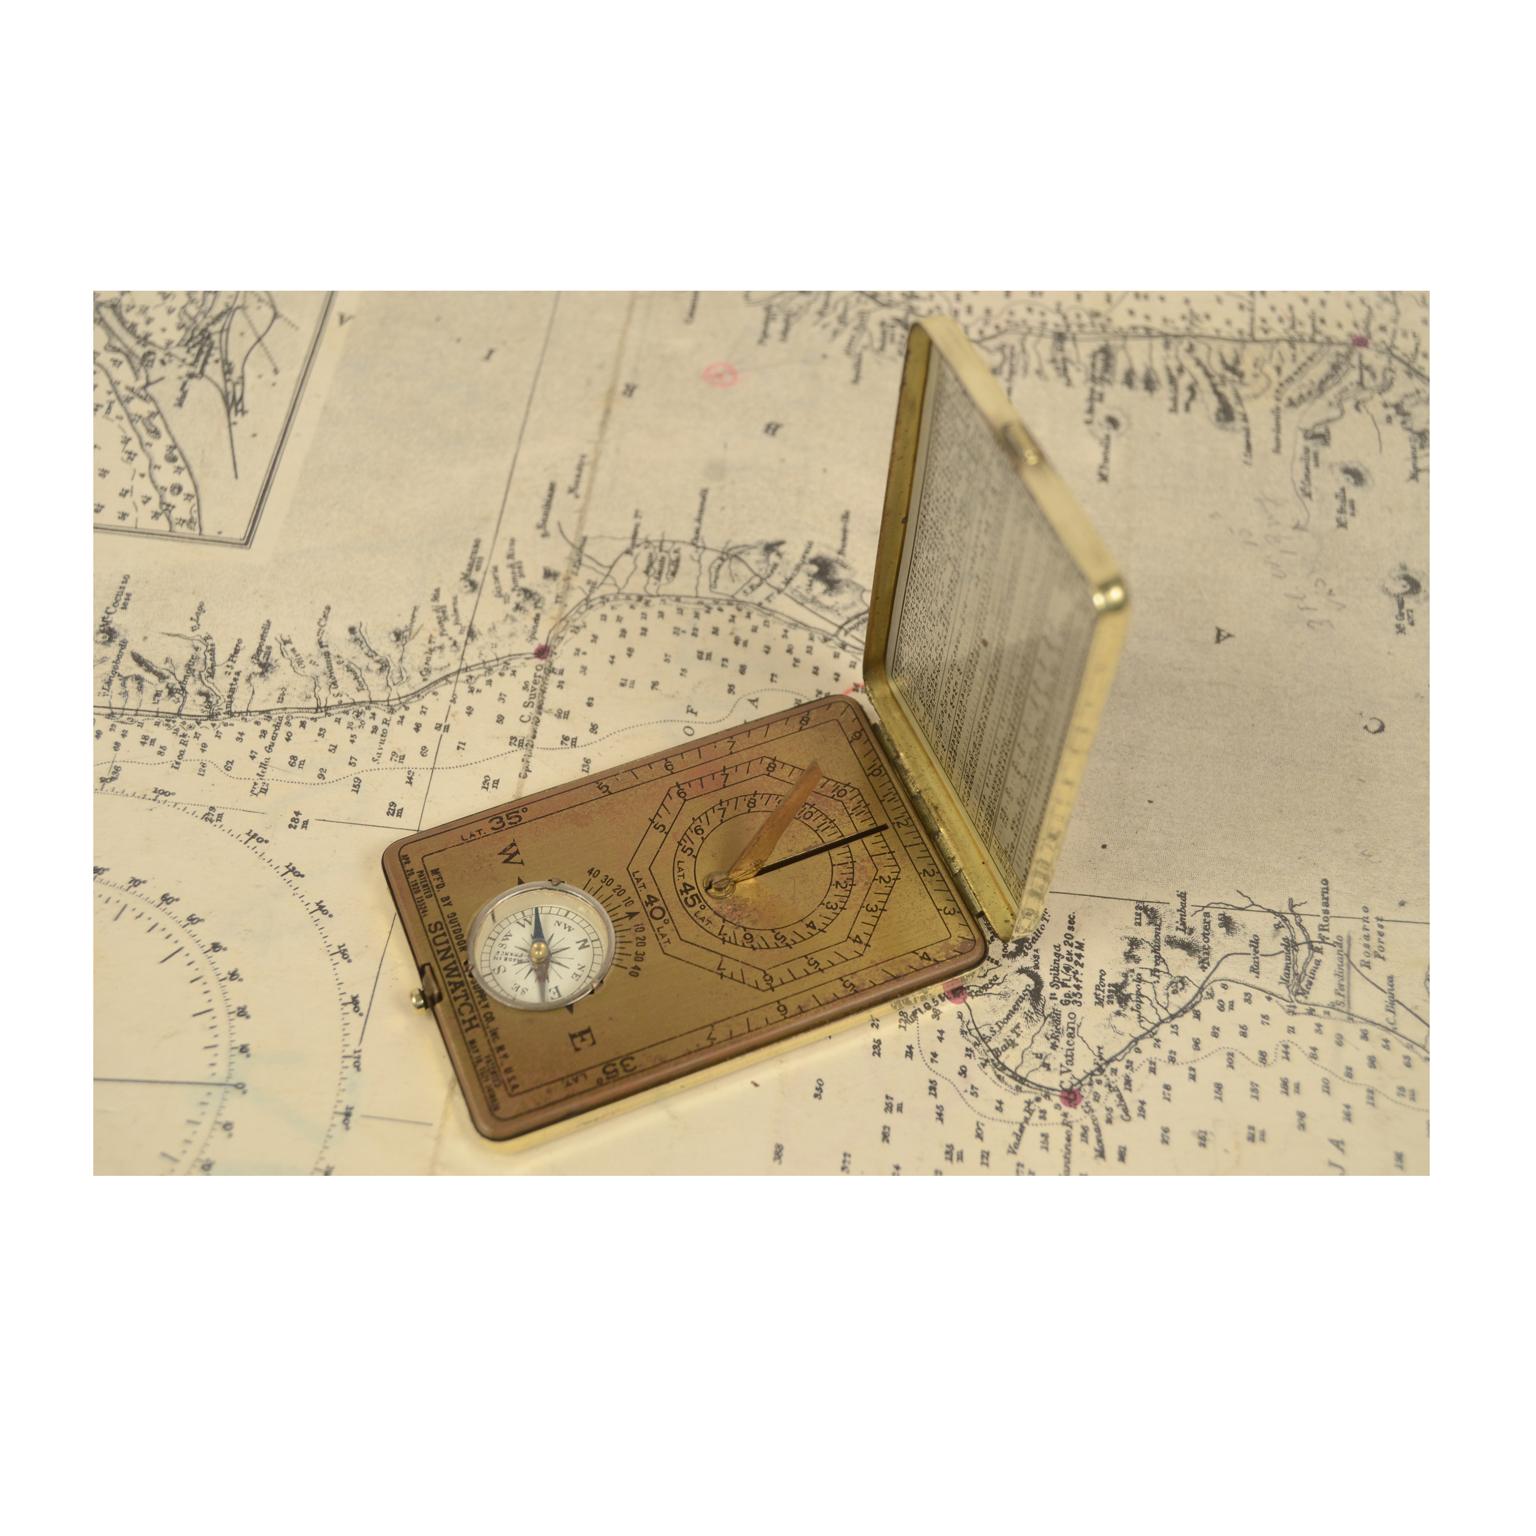 Brass sundial compass signed Outdoor Supply Co. Inc. N.Y. USA, 1921. The clock is equipped with a compass for orientation, to read the time correctly it must be oriented towards the North, the hour dial is traced inside the lid, the clock works by